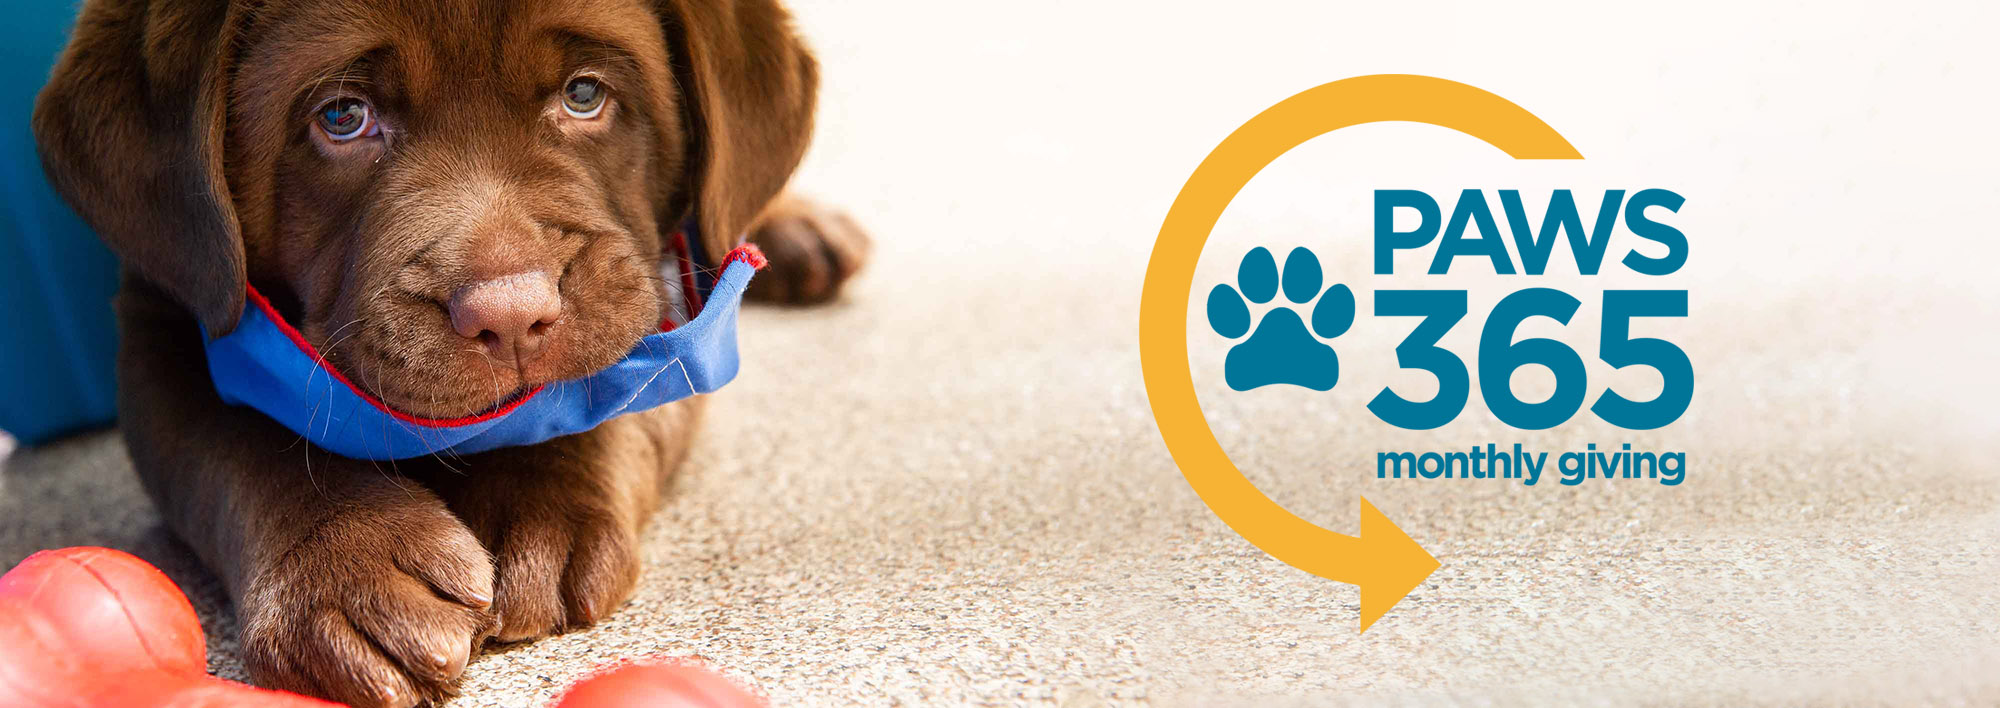 Close-up photo of a chocolate Labrador puppy is lying on a tan floor, looking straight into the camera. He is wearing a blue bandanna, which he is chewing a little bit. On the right side of the image is the Paws 365 monthly giving logo